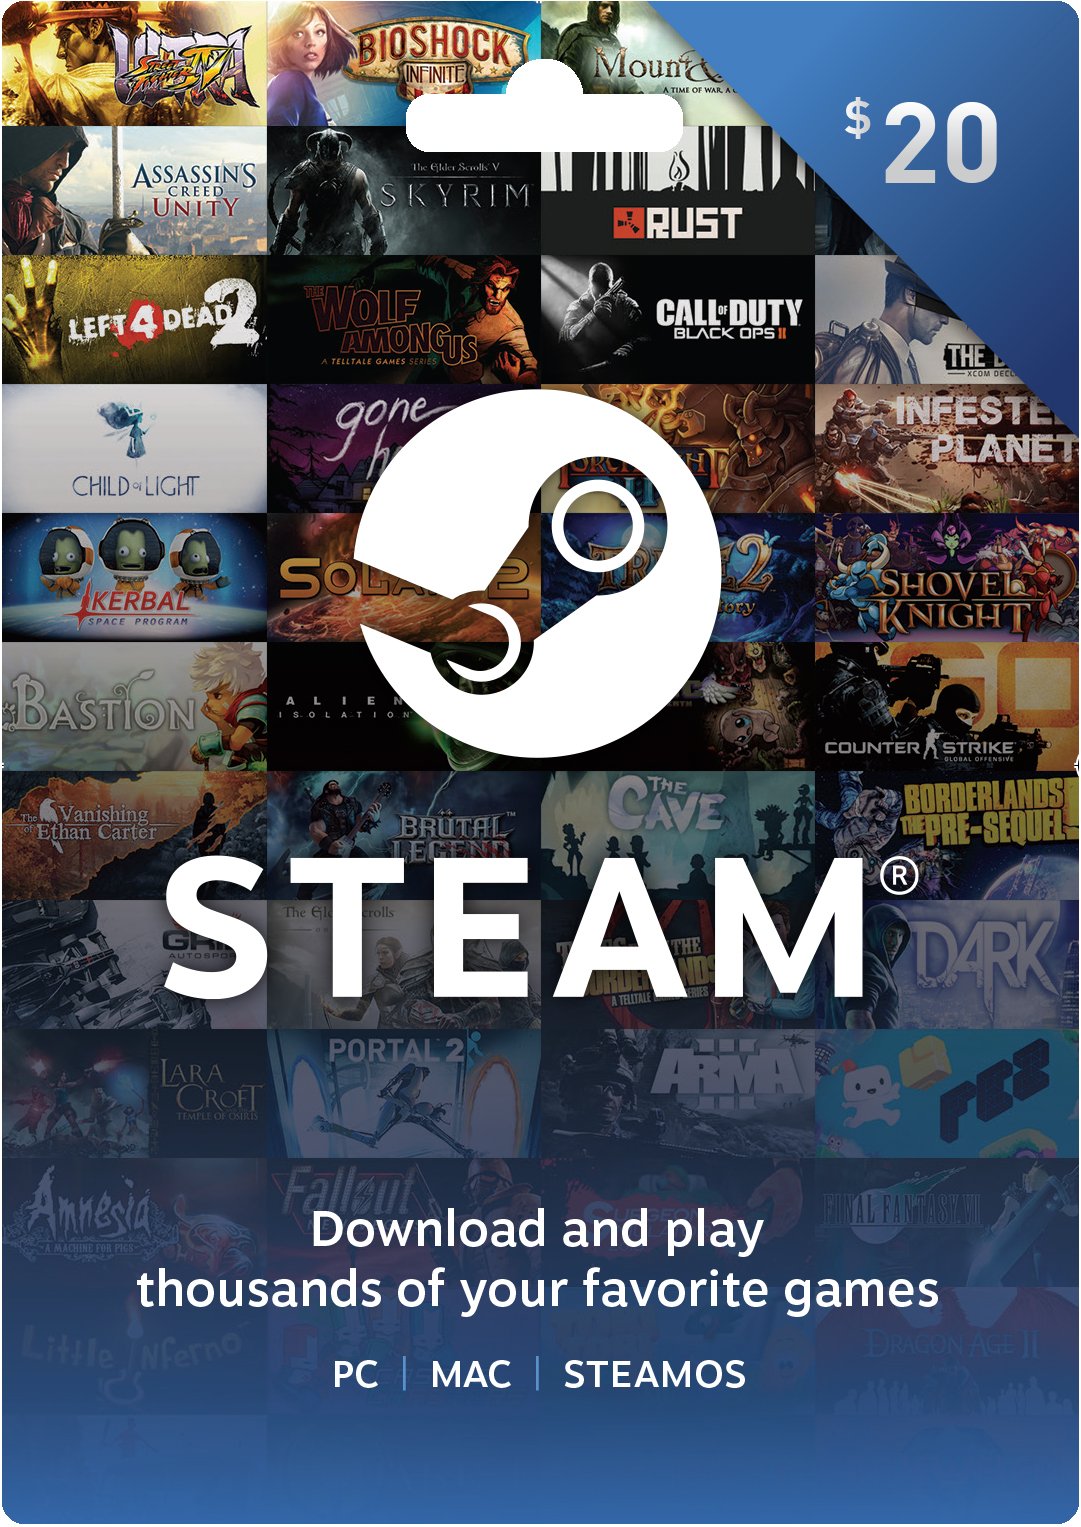 Convert Amazon credit to Steam Wallet [UK but possibly others] :: Steam Deck Discusiones generales